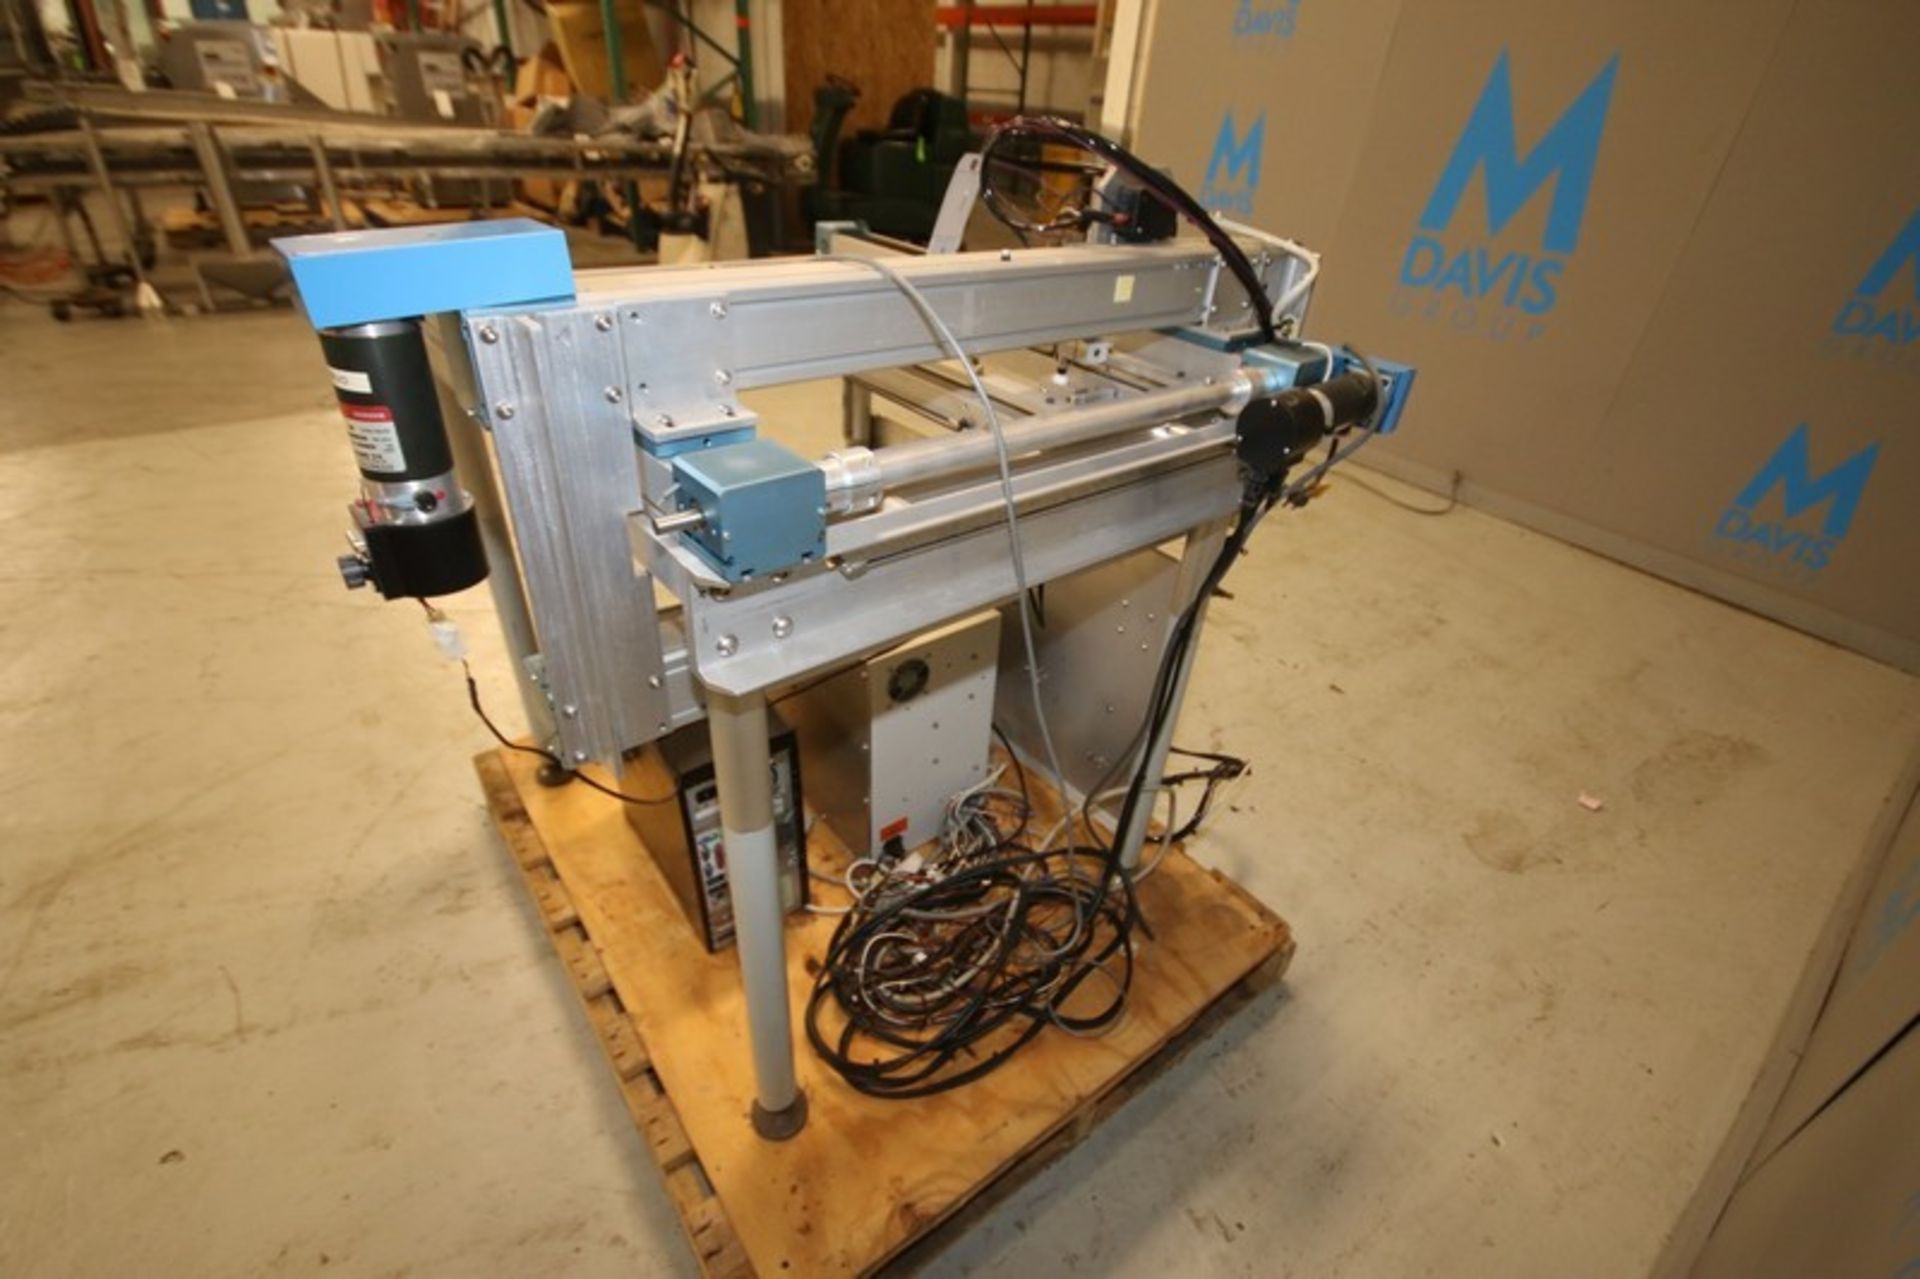 Custom Designed 32" W x 36" L x 33" H Axis Table with Servo Drive & High Speed Controller, Baldor - Image 5 of 7